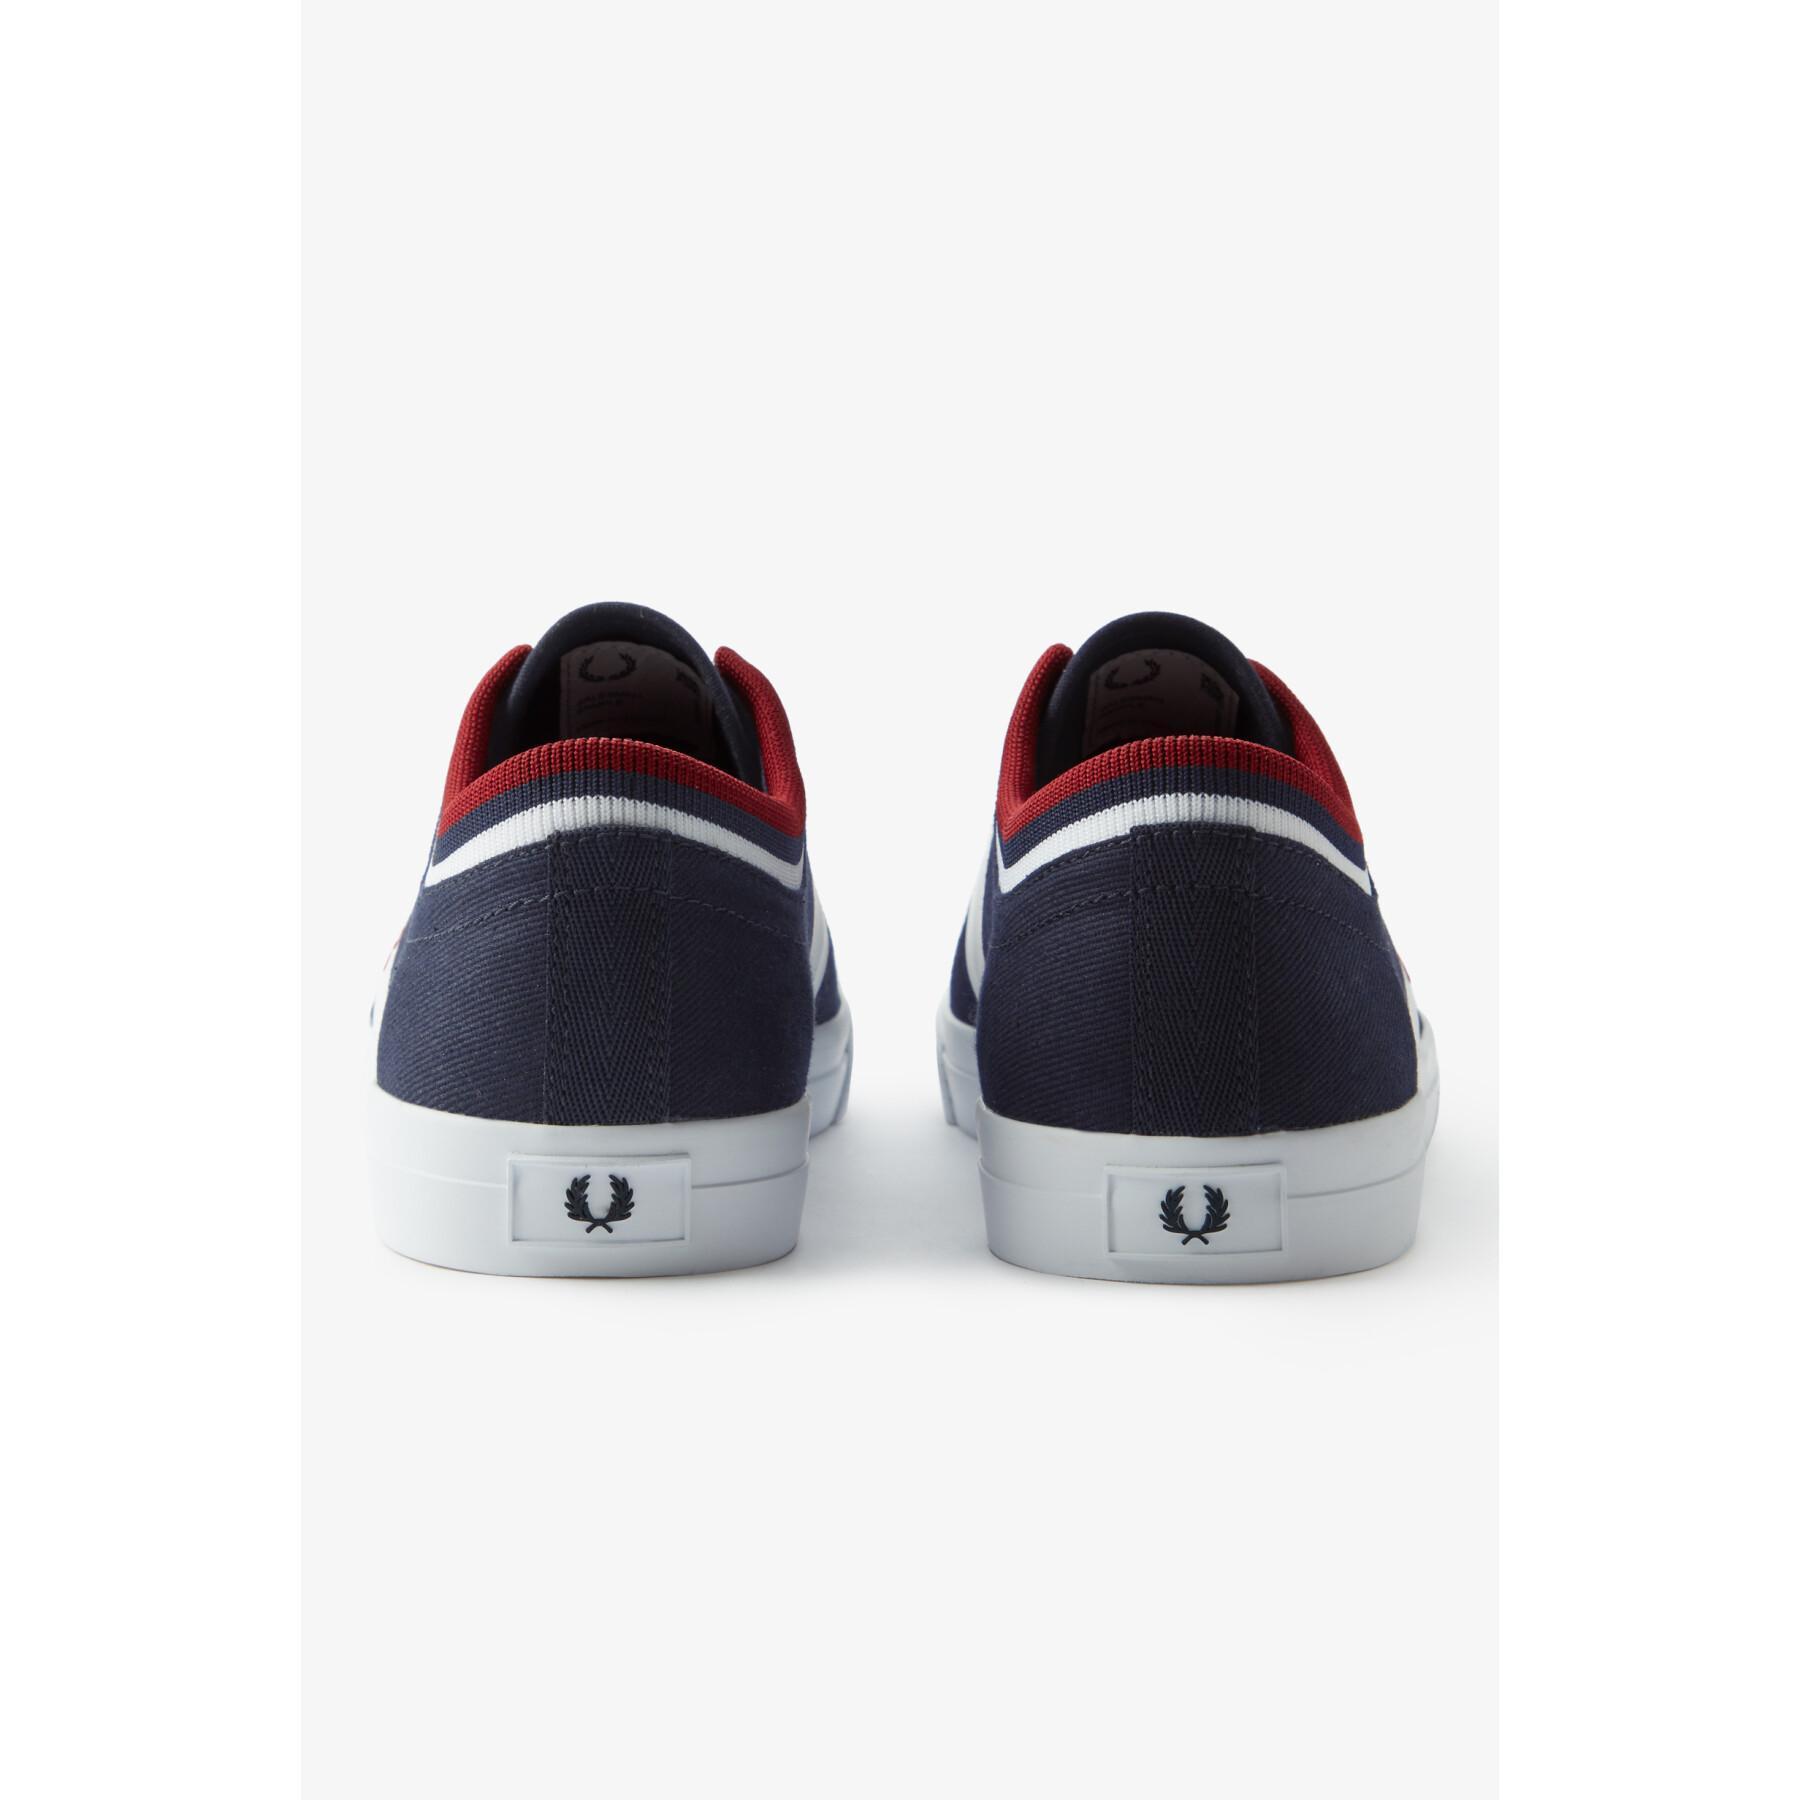 Keperstof sportschoenen Fred Perry Underspin tipped cuff